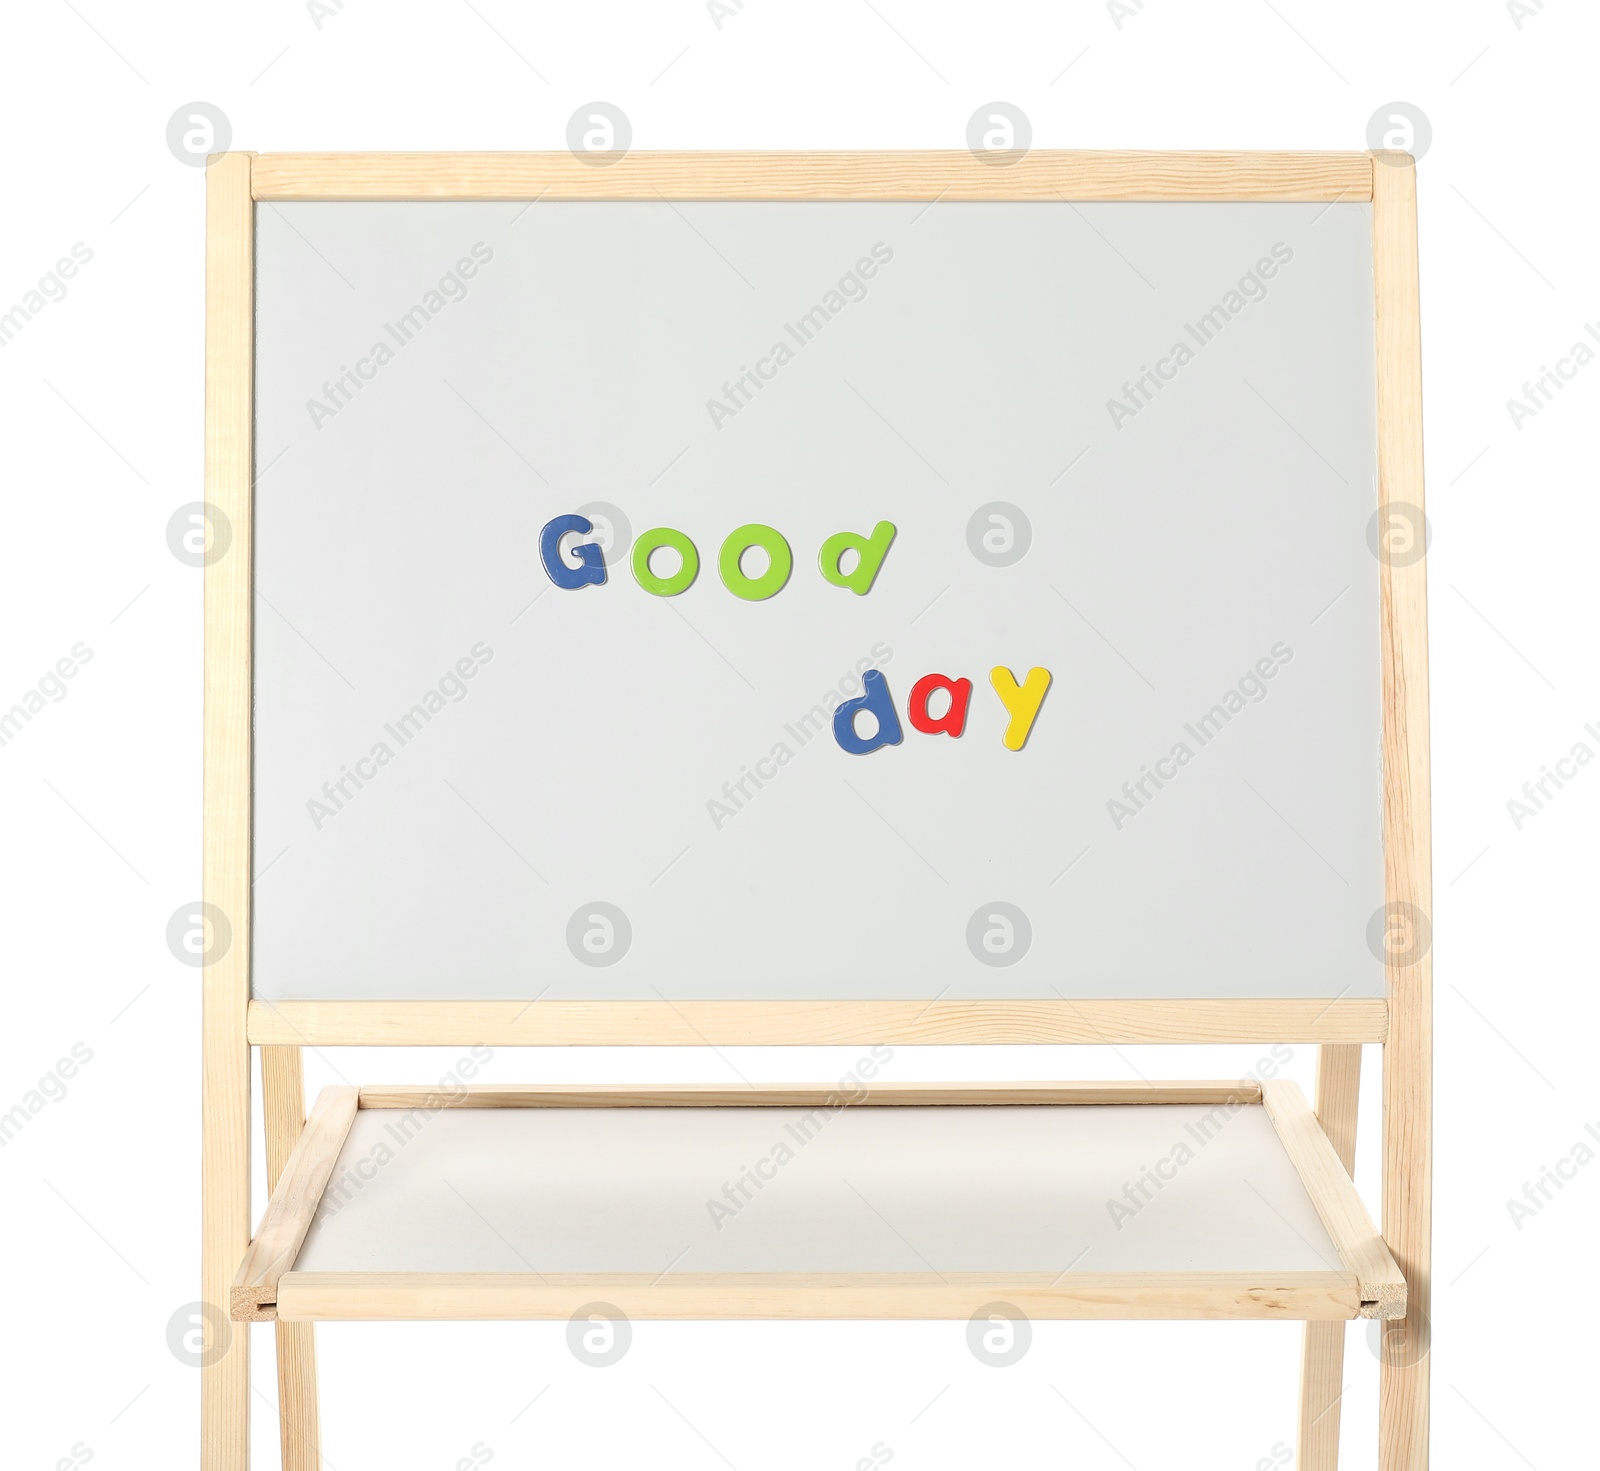 Photo of Words Good Day made of magnetic letters on board against white background. Learning alphabet